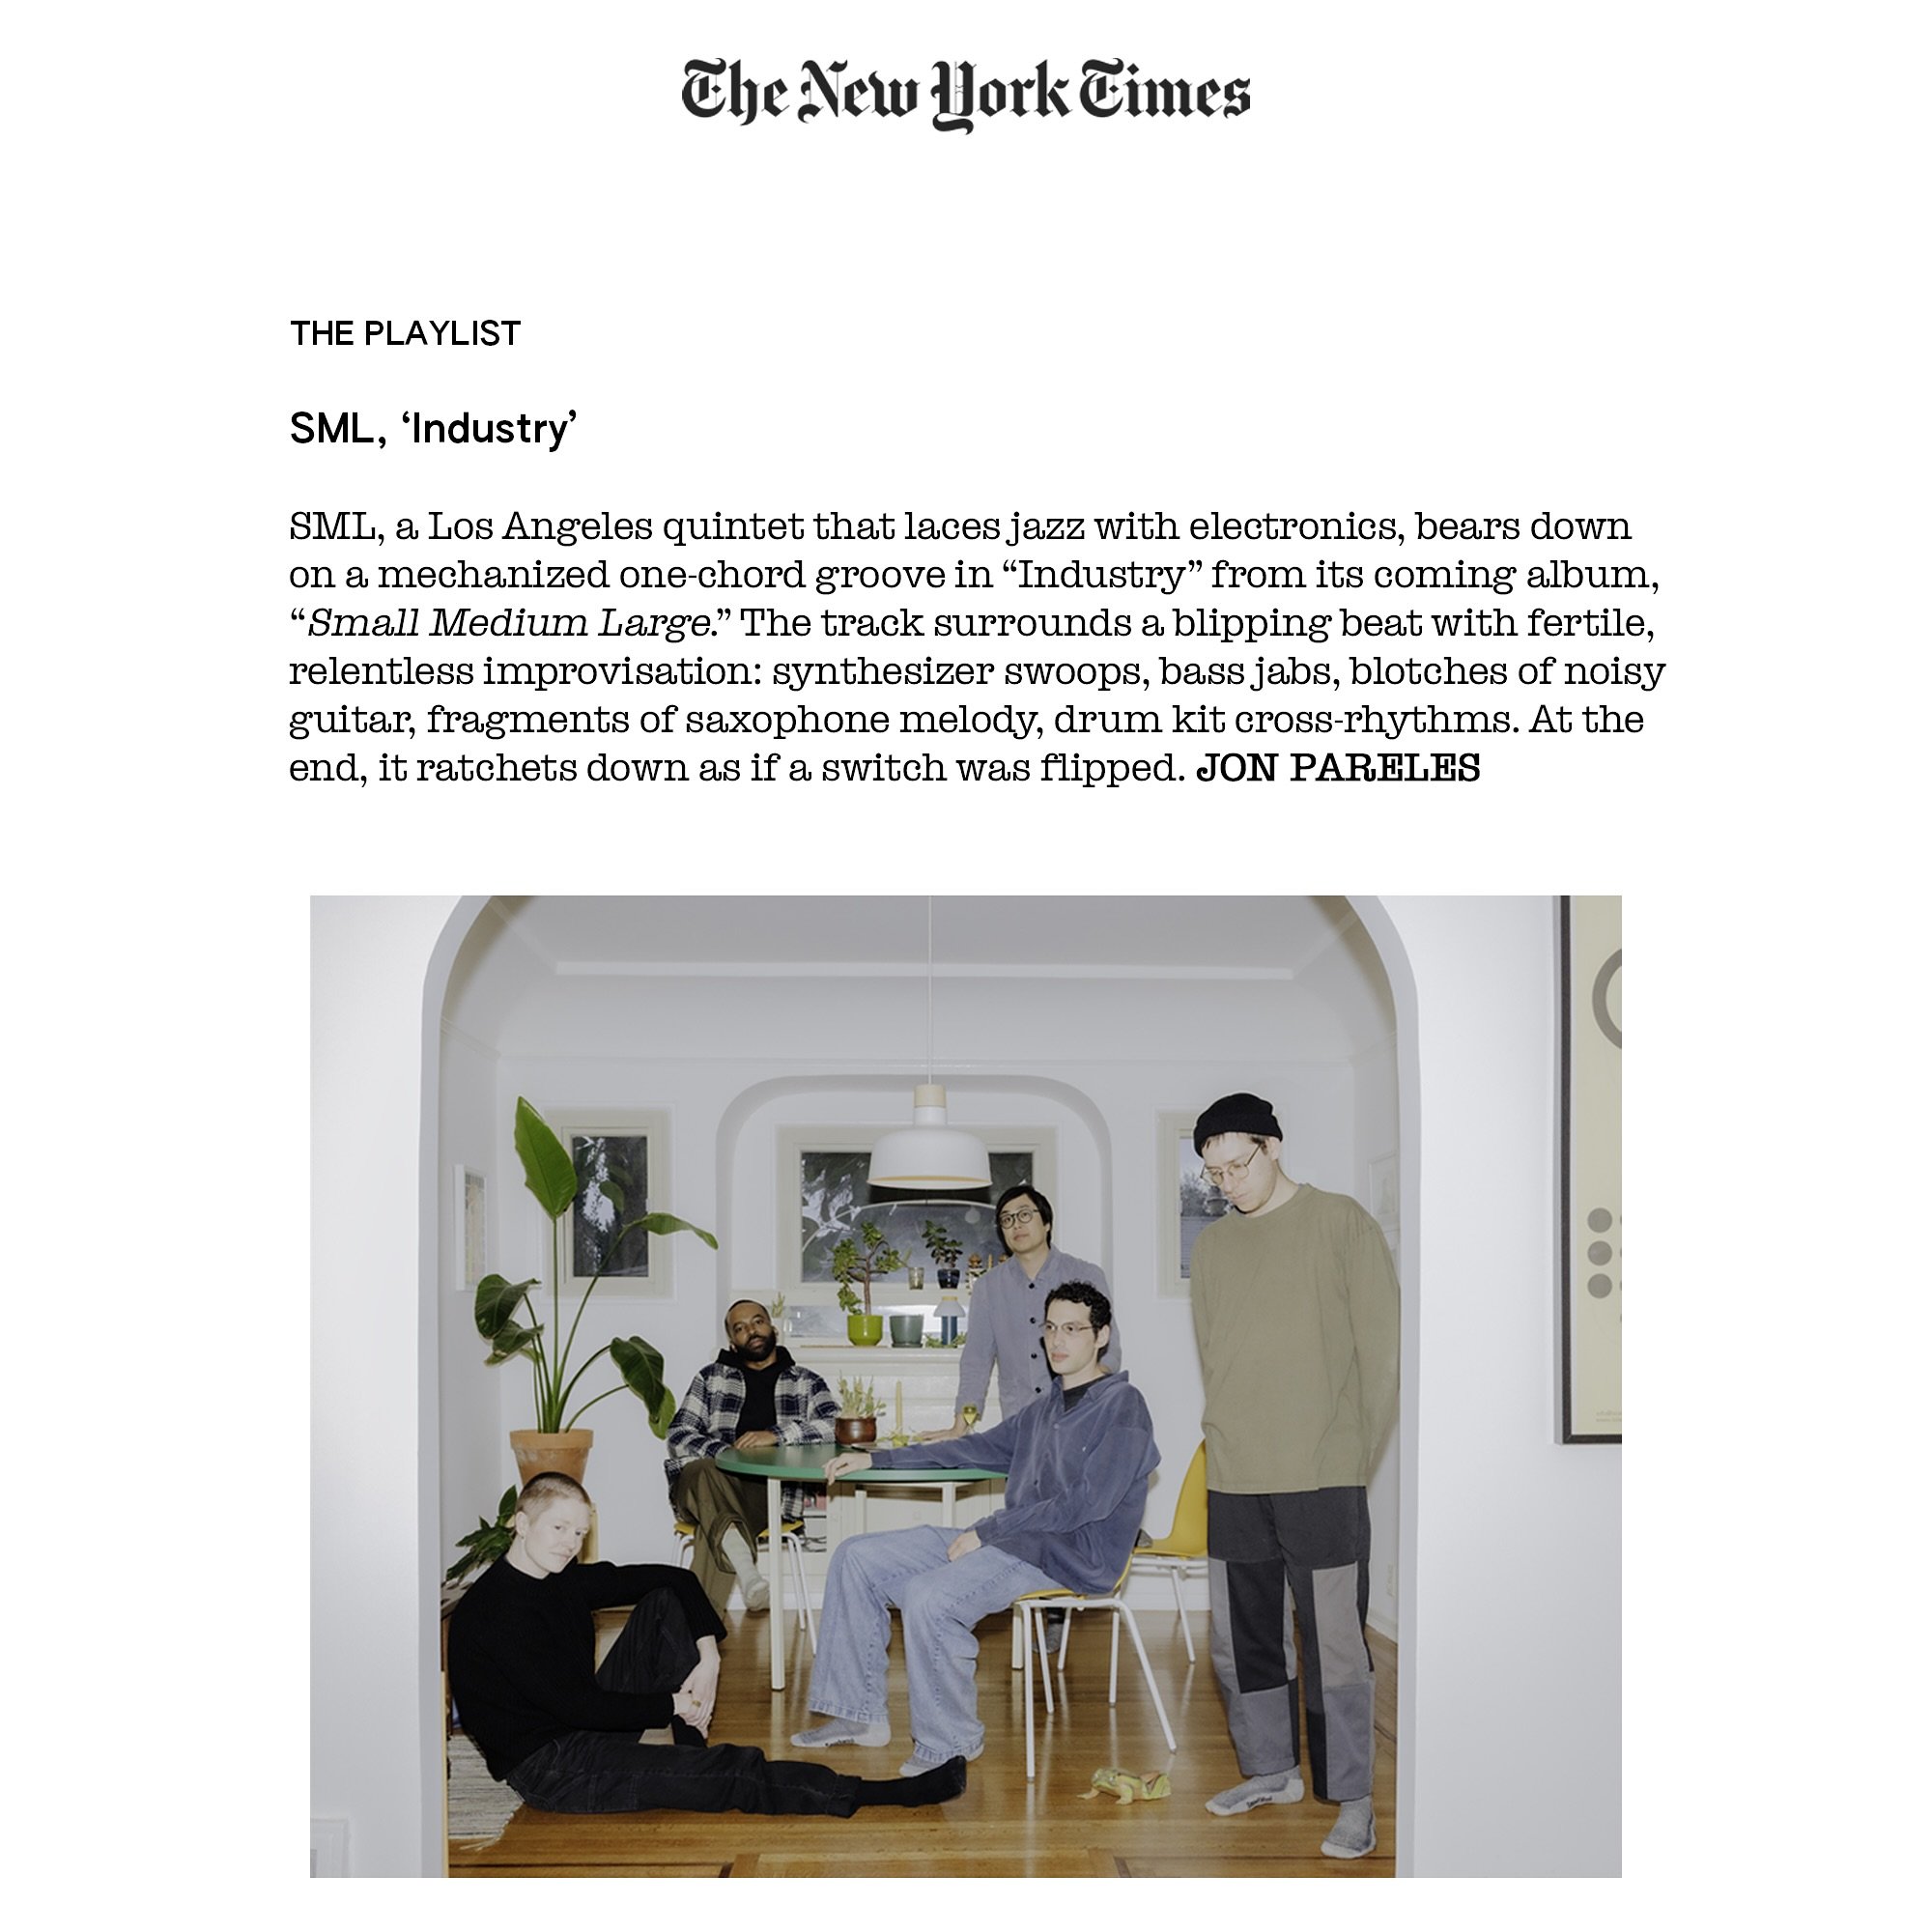 𝗦𝗠𝗟&rsquo;s &lsquo;𝑰𝒏𝒅𝒖𝒔𝒕𝒓𝒚&rsquo; is included on The @nytimes &rsquo; 𝗧𝗵𝗲 𝗣𝗹𝗮𝘆𝗹𝗶𝘀𝘁 today. Listen to it via the link in our bio 🔊